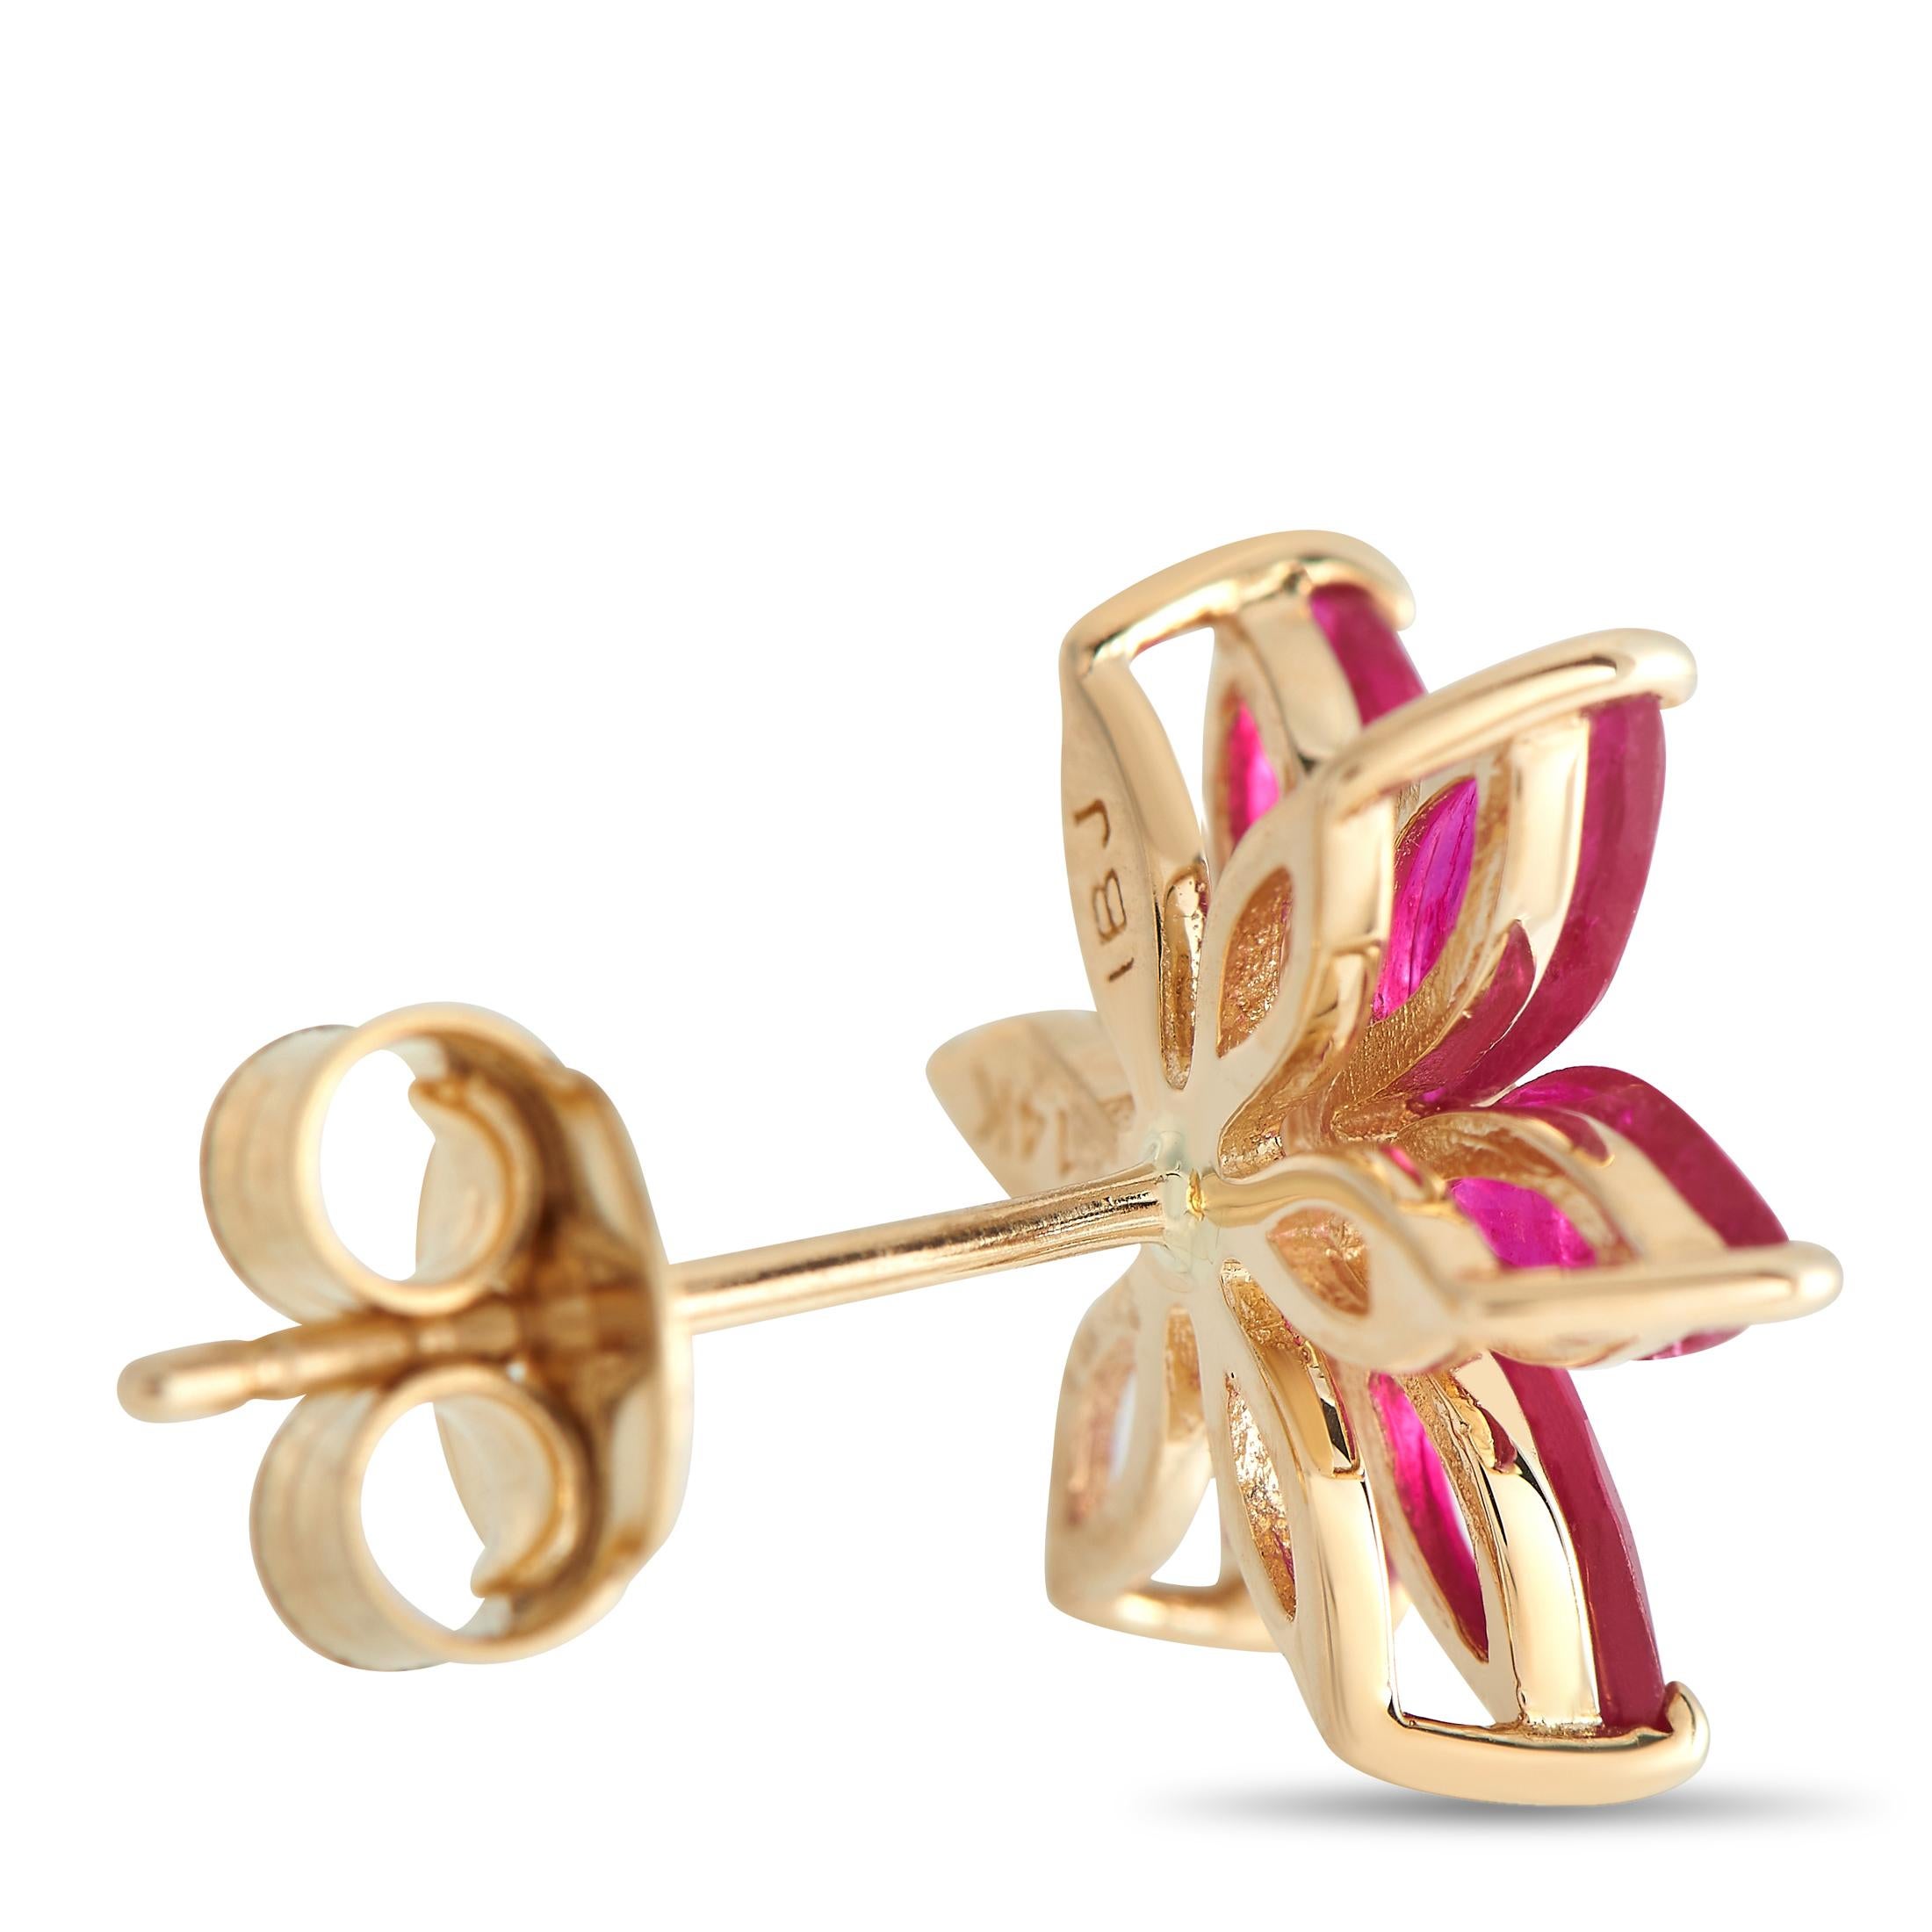 Polish your ladylike looks with these floral earrings decorated with marquise-cut rubies. Each 14K yellow gold stud has a floral basket mounted with marquise ruby petals and a diamond center. A push-back closure fastens the earring in place.Offered